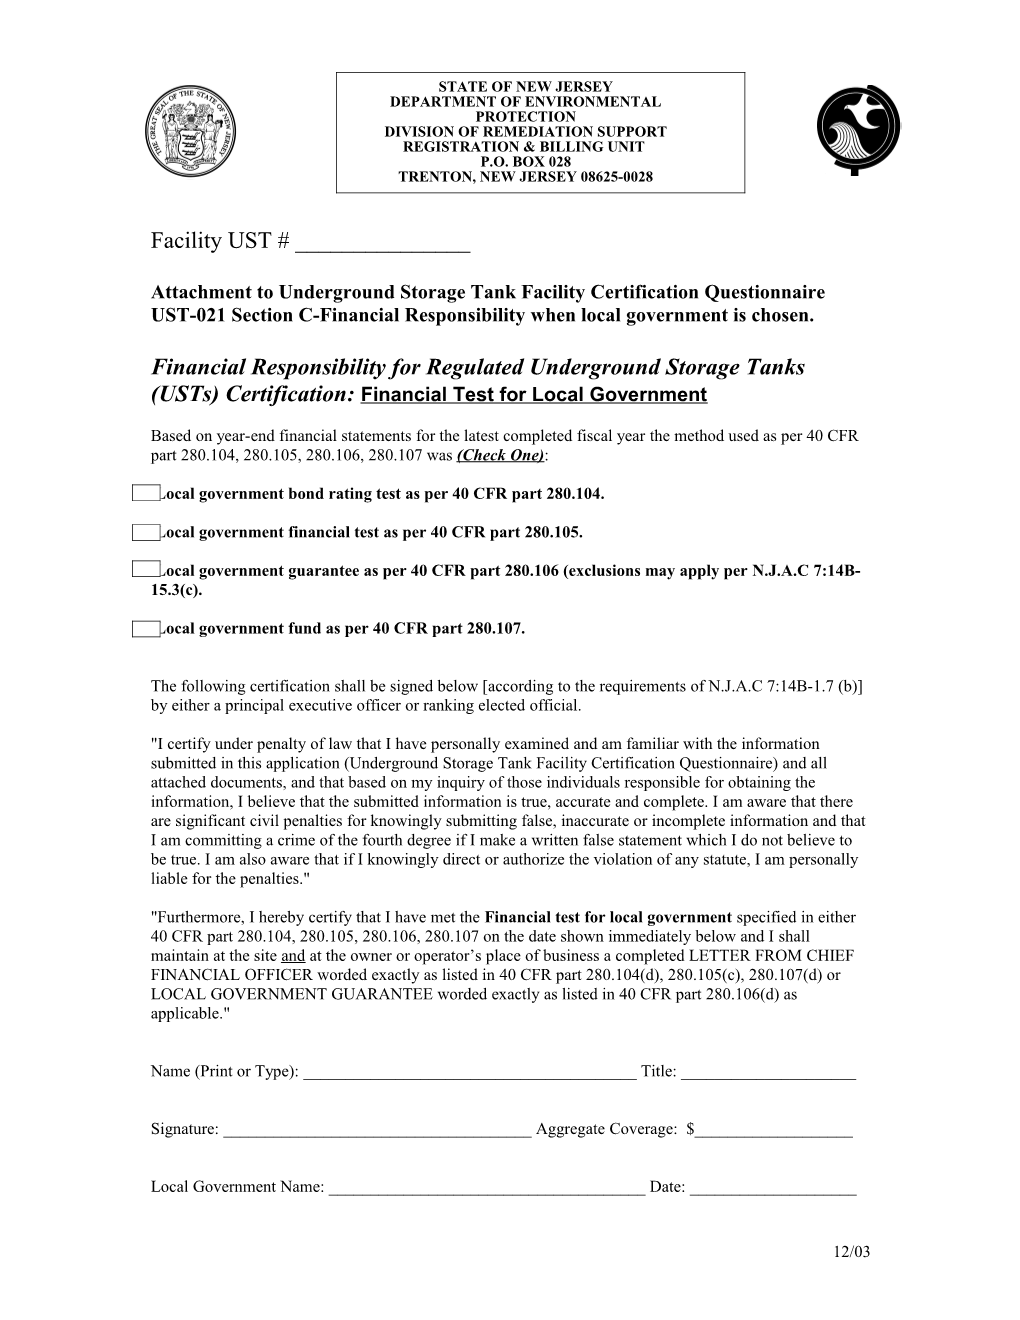 Attachment to Underground Storage Tank Facility Certification Questionnaire UST-021 Section